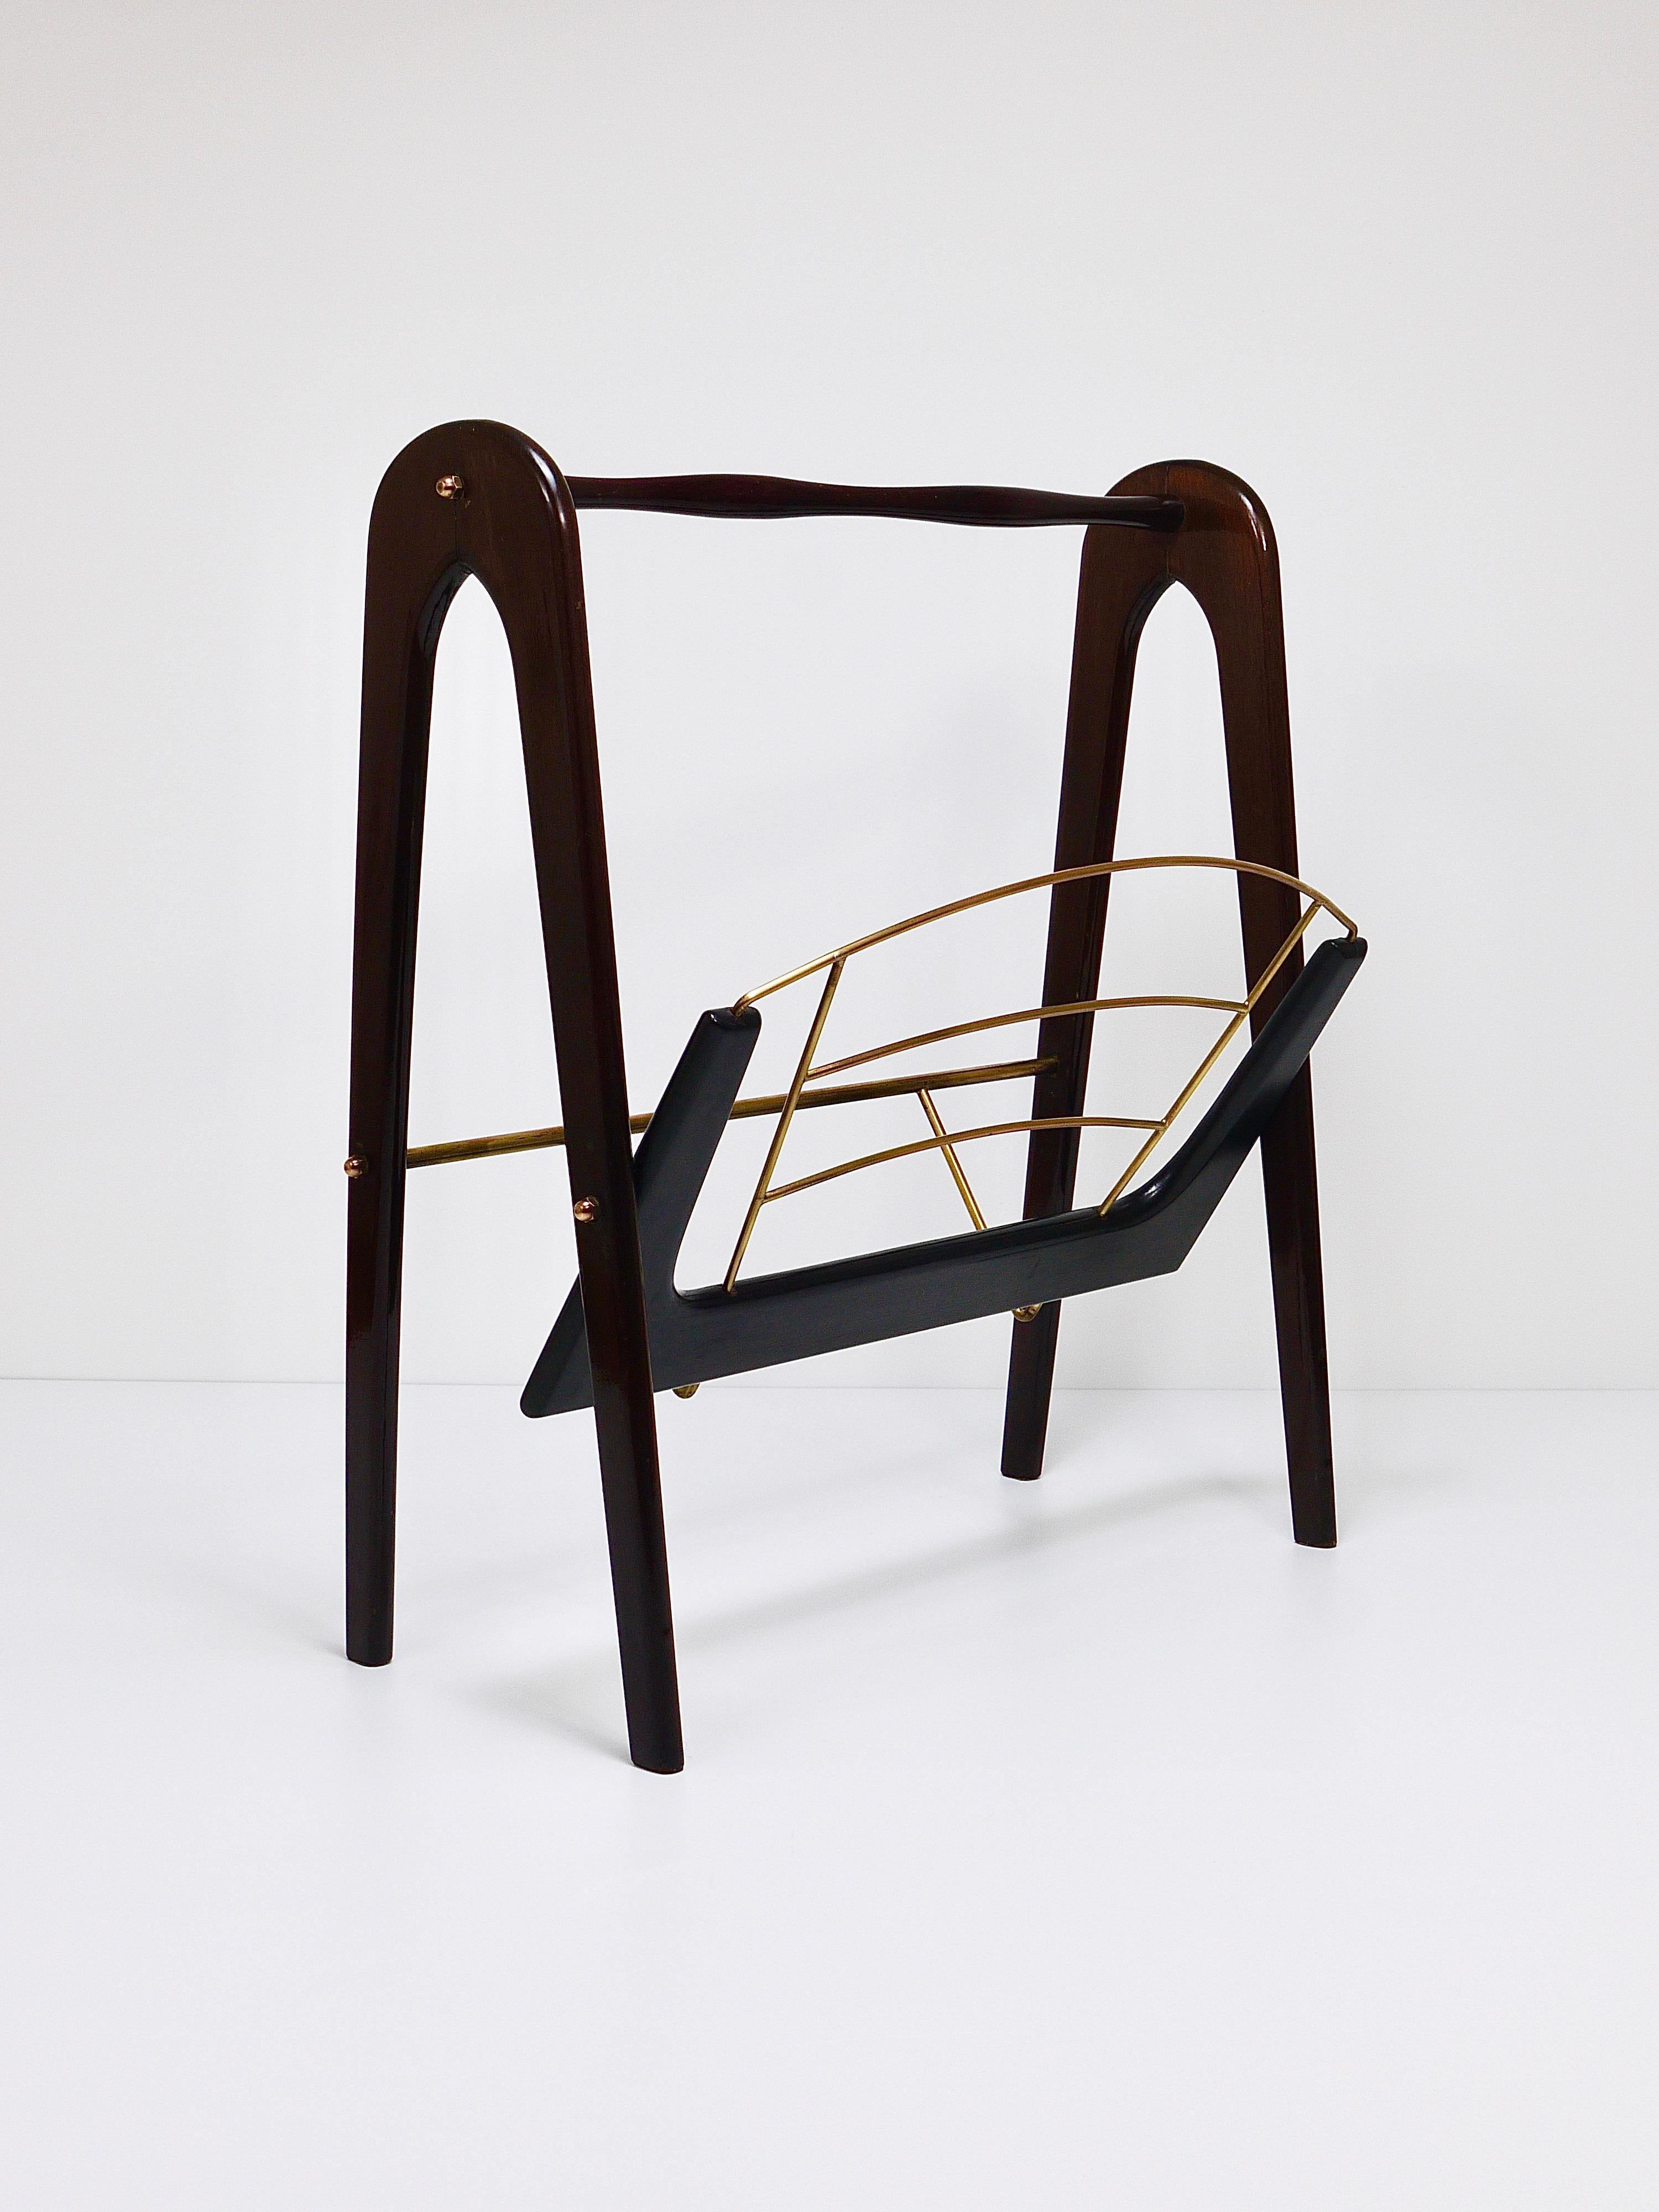 20th Century Cesare Lacca Midcentury Magazine Rack, Mahogany & Brass, Italy, 1950s For Sale